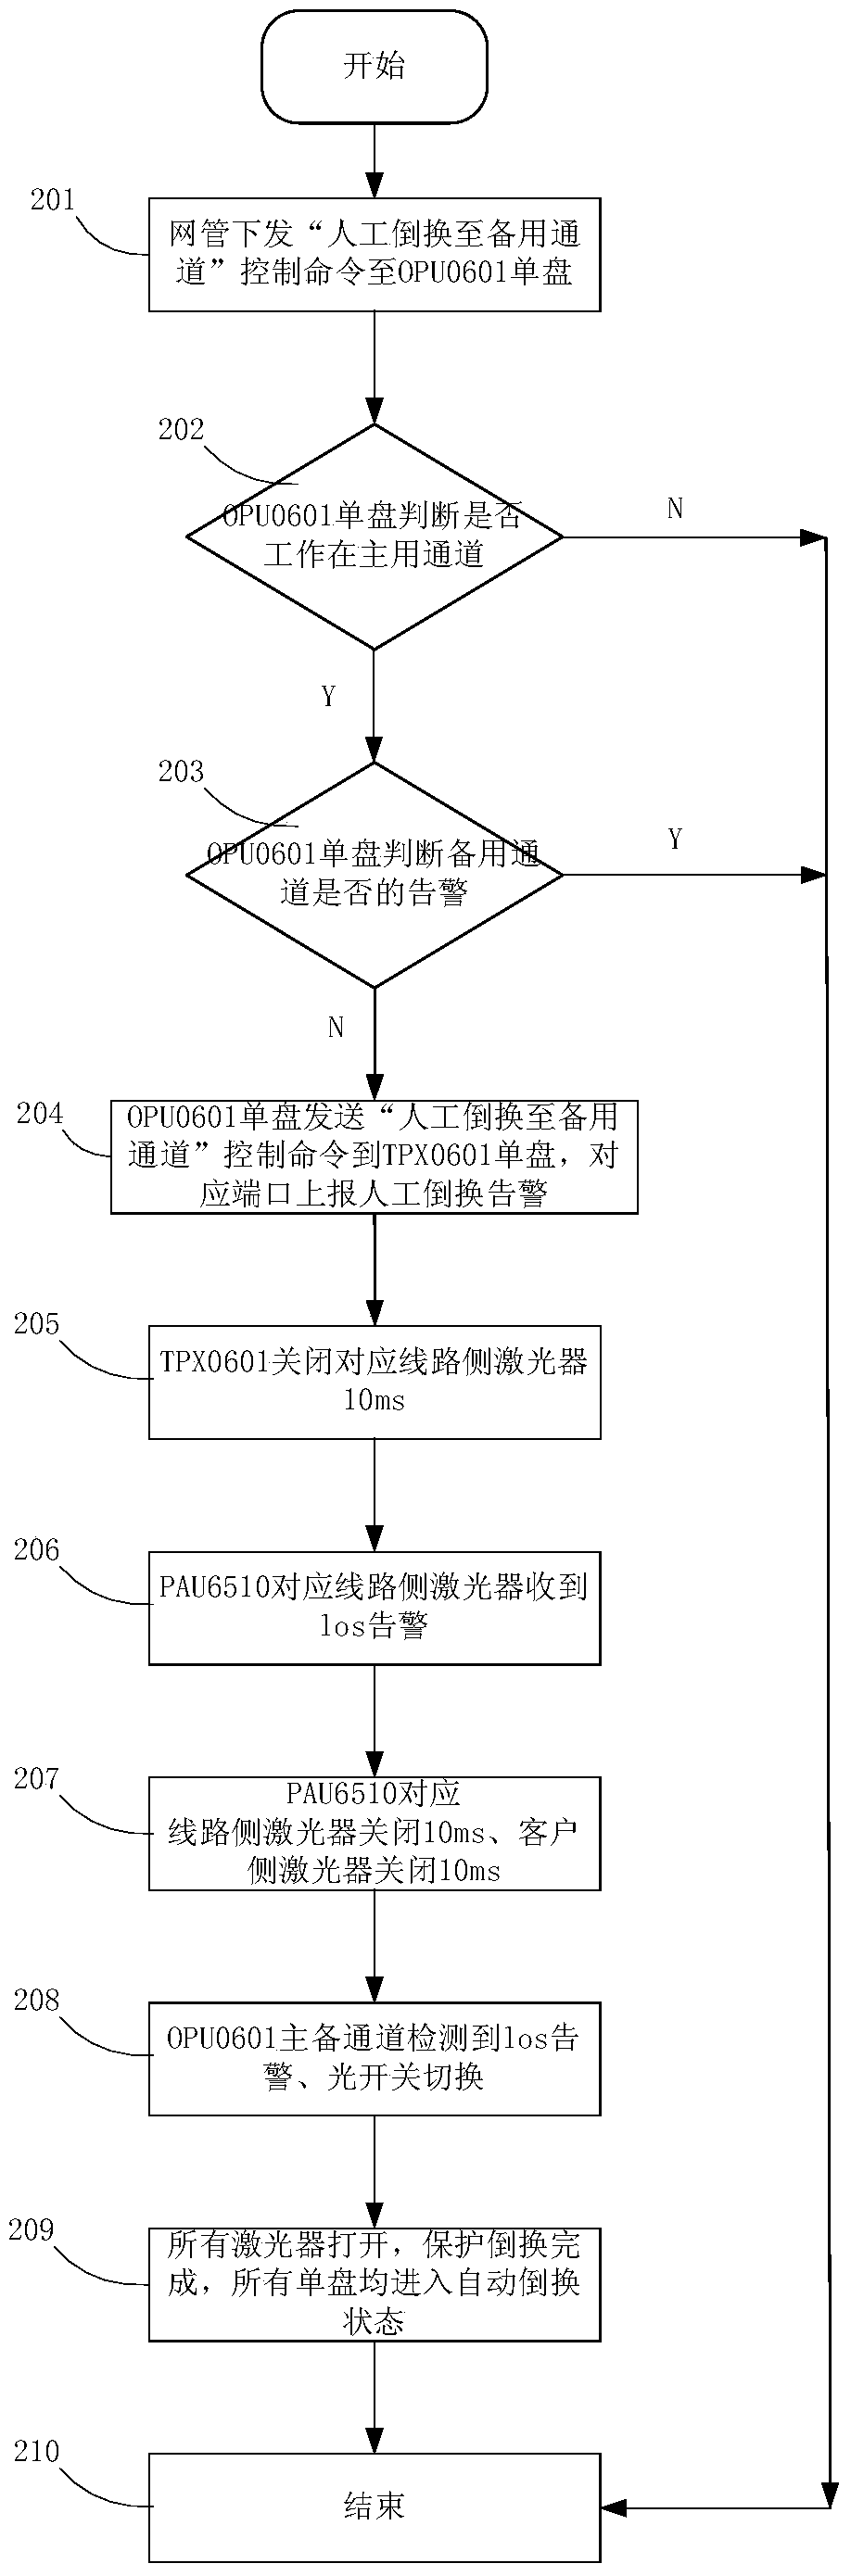 Protection switching method of mobile communication system based on c-ran architecture